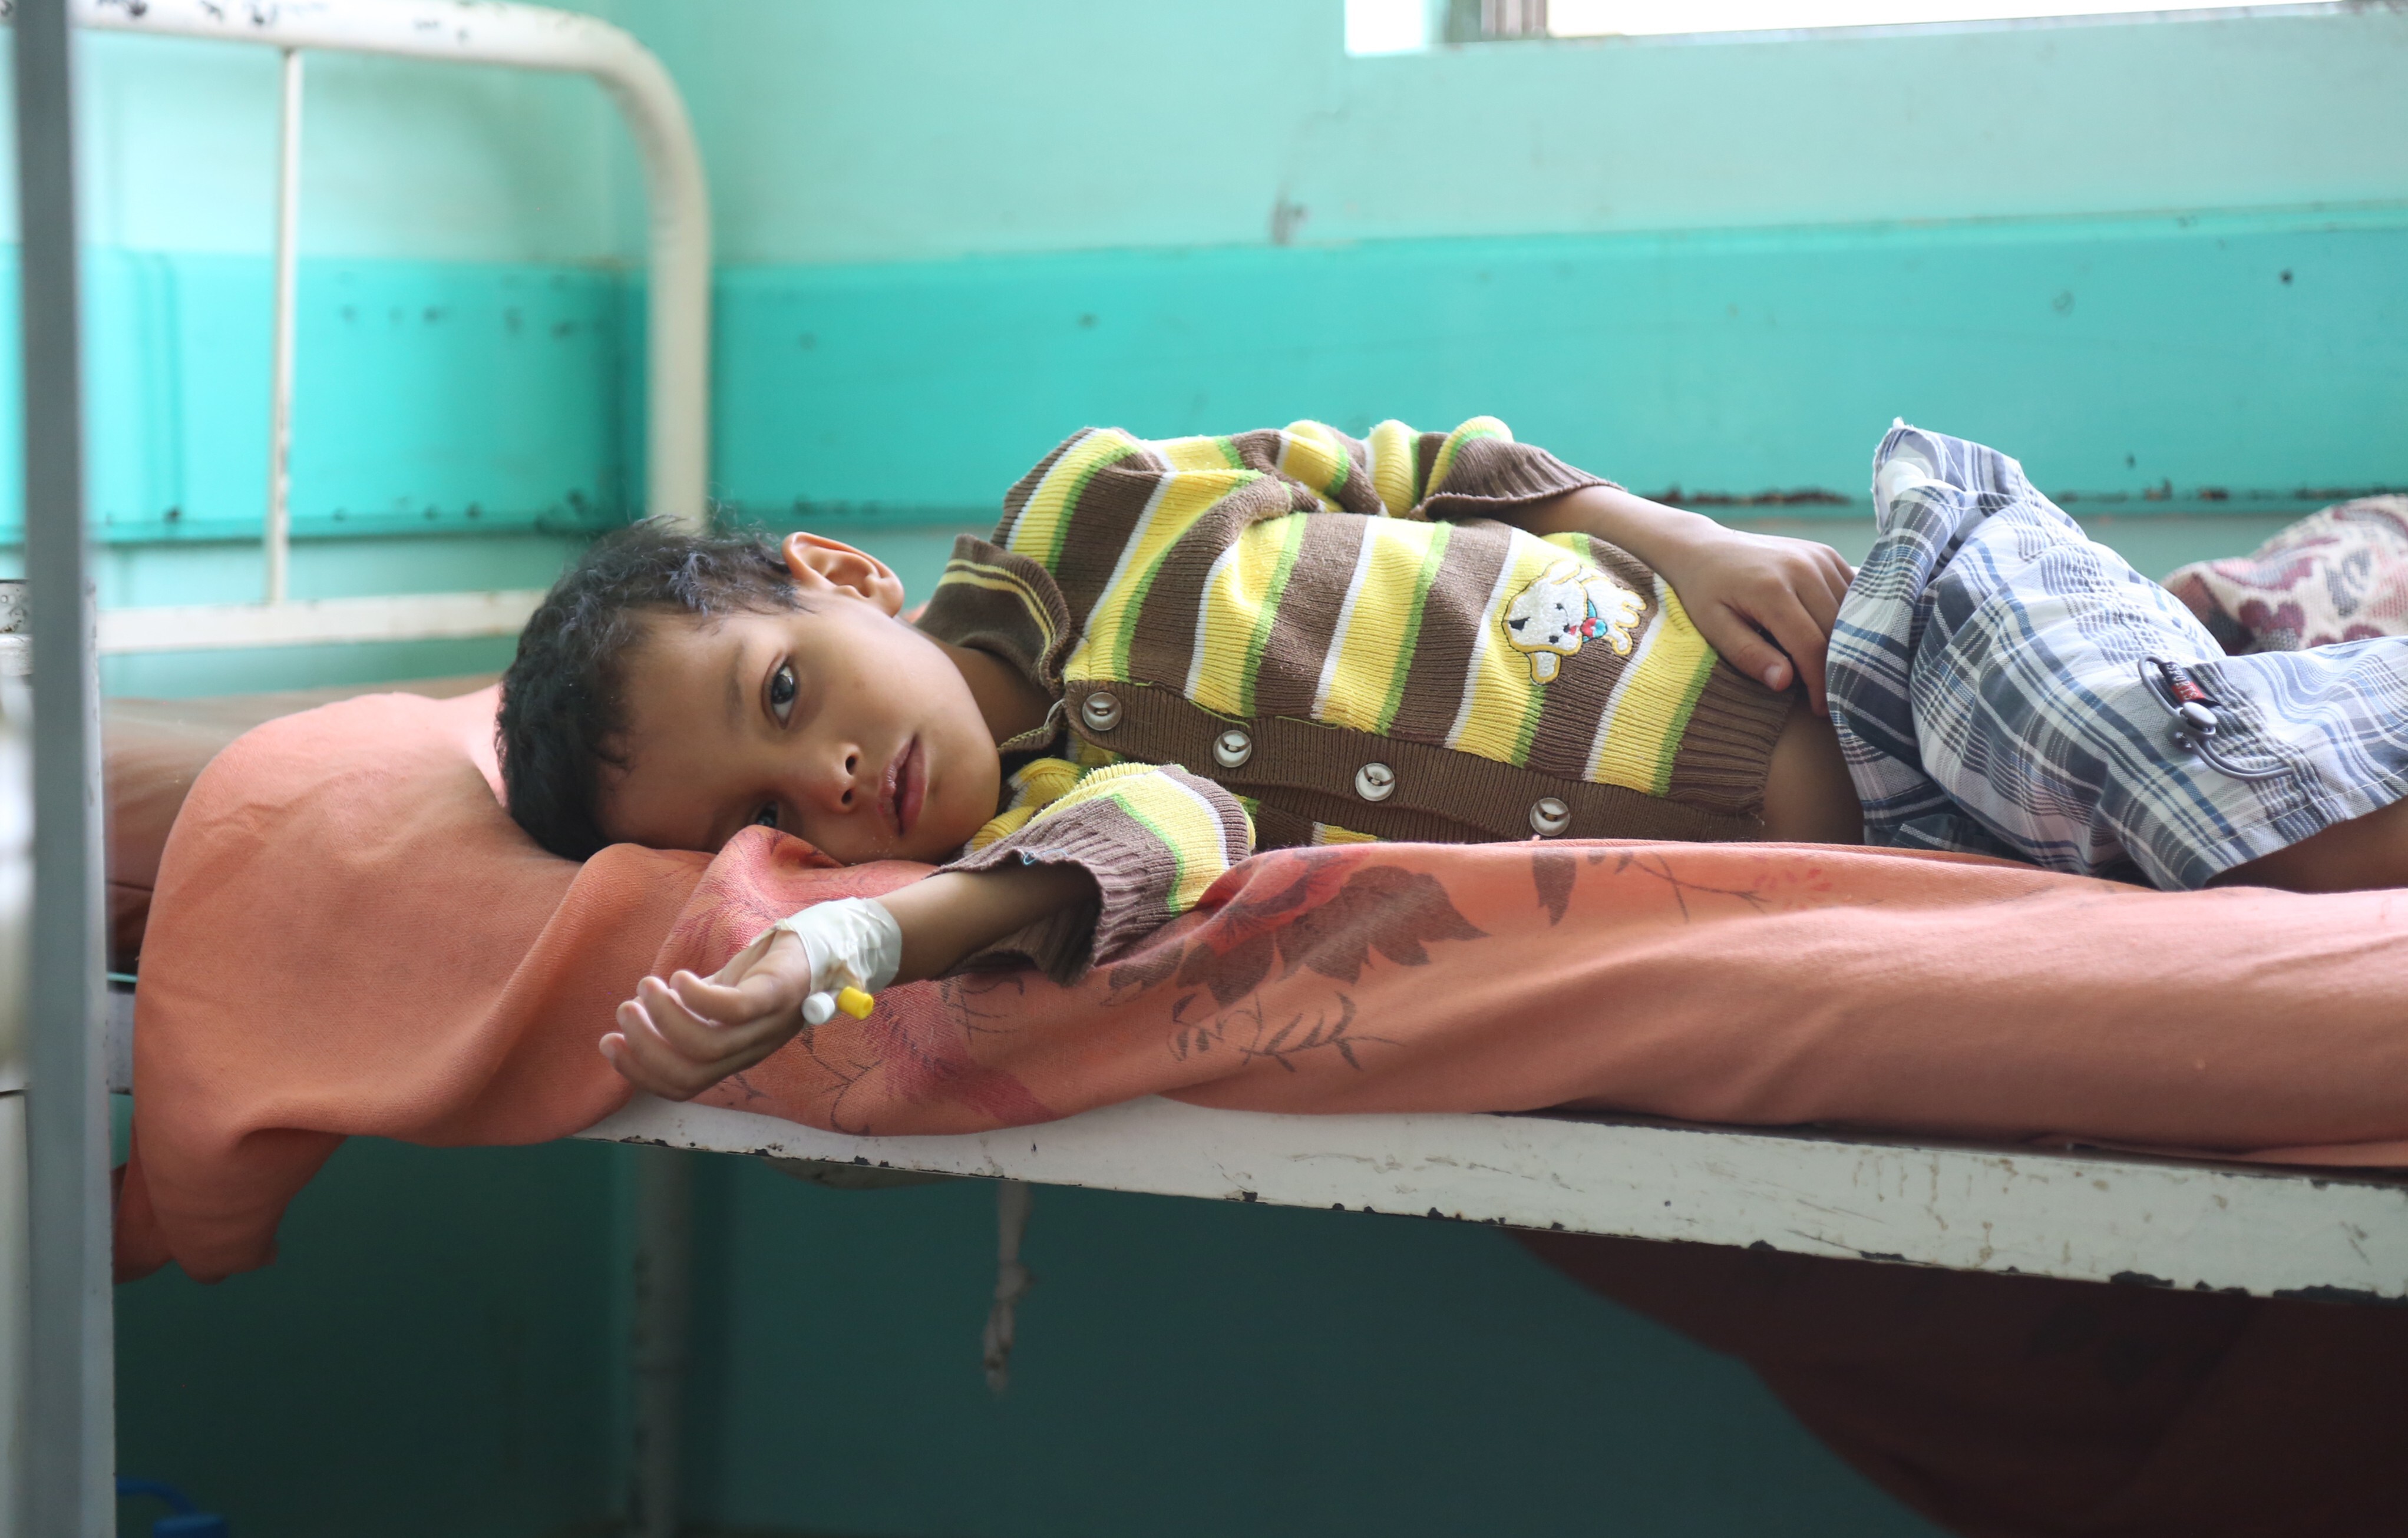 The combination of war, famine and disease in Yemen has created one of the most pressing humanitarian problems in modern history.